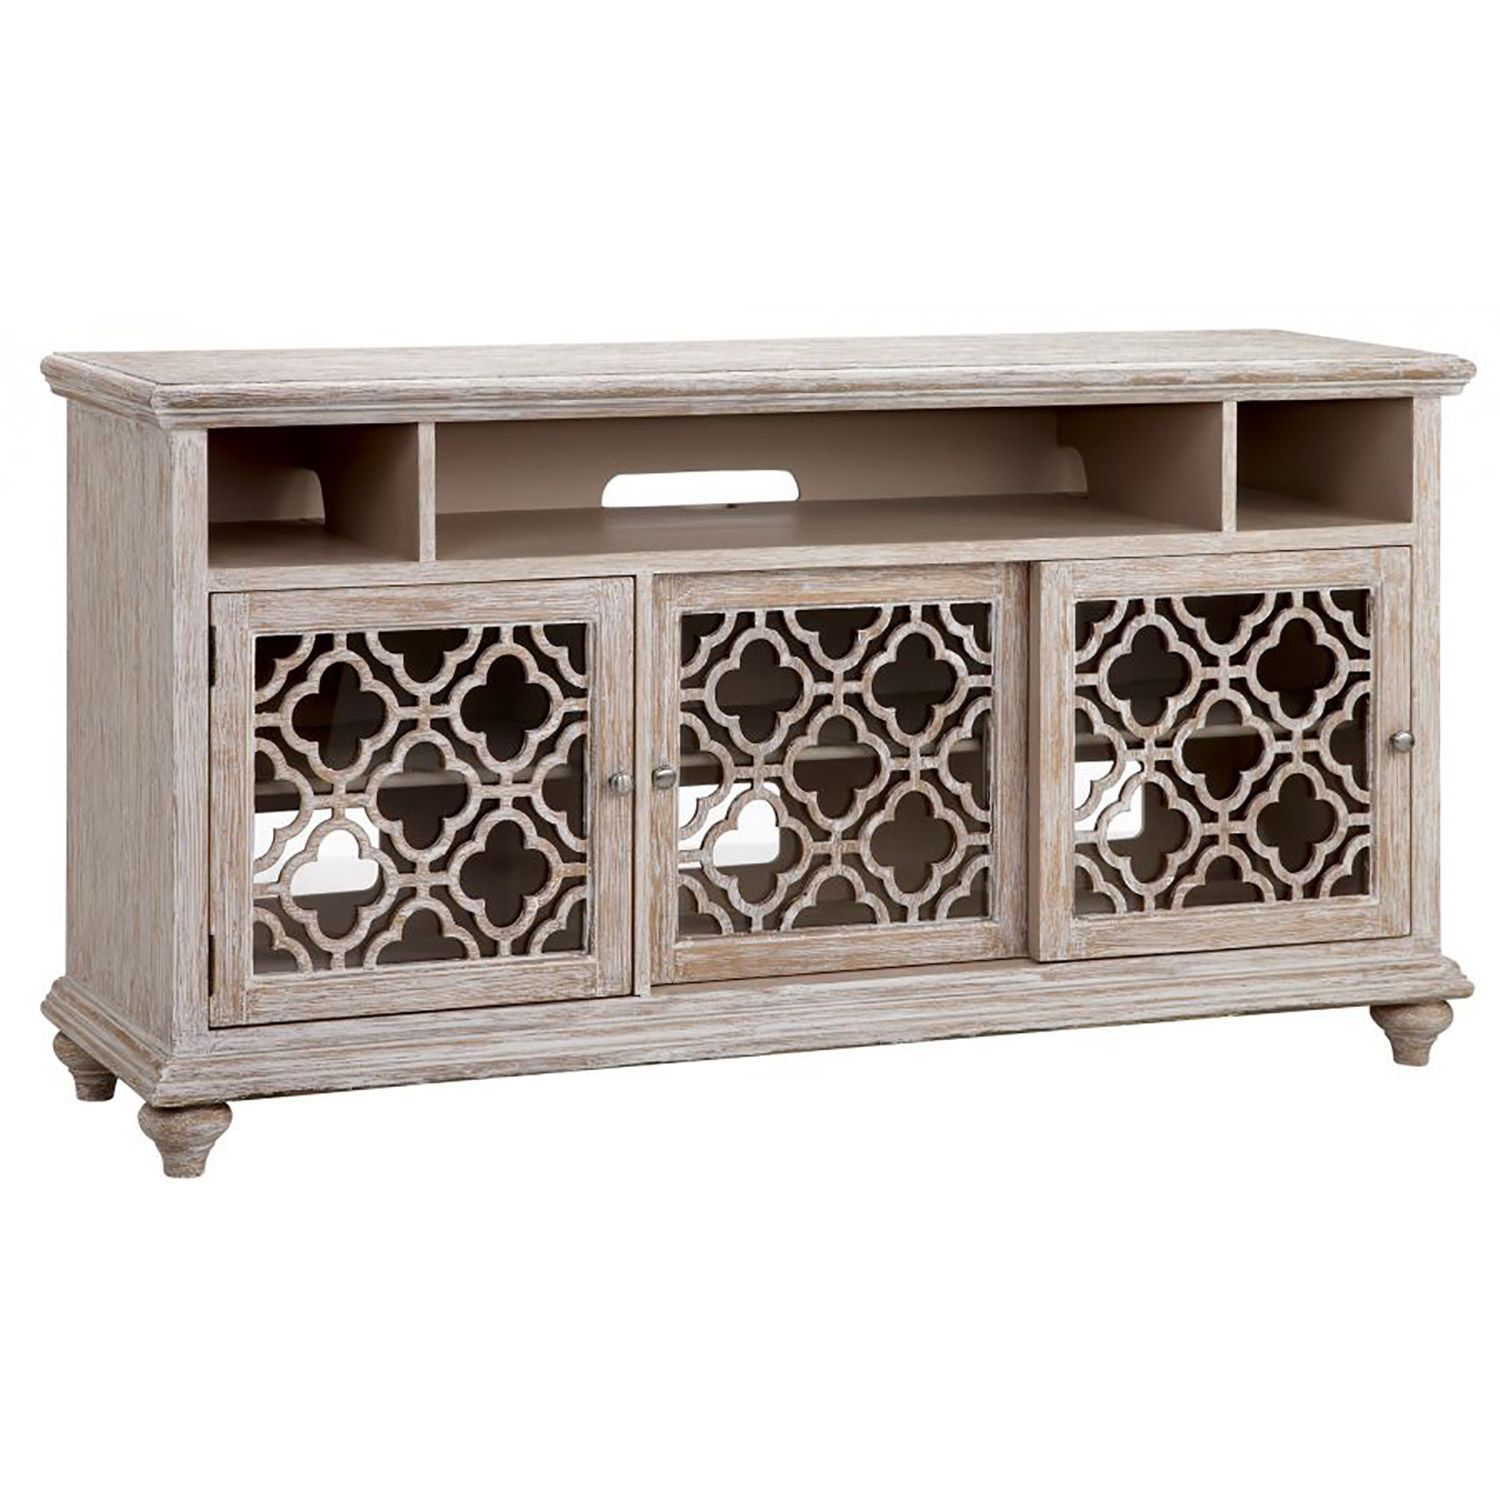 Picture Of 64 Inch Lattice Tv Console, White | Lavie Intended For Tott And Eling Sideboards (View 27 of 30)